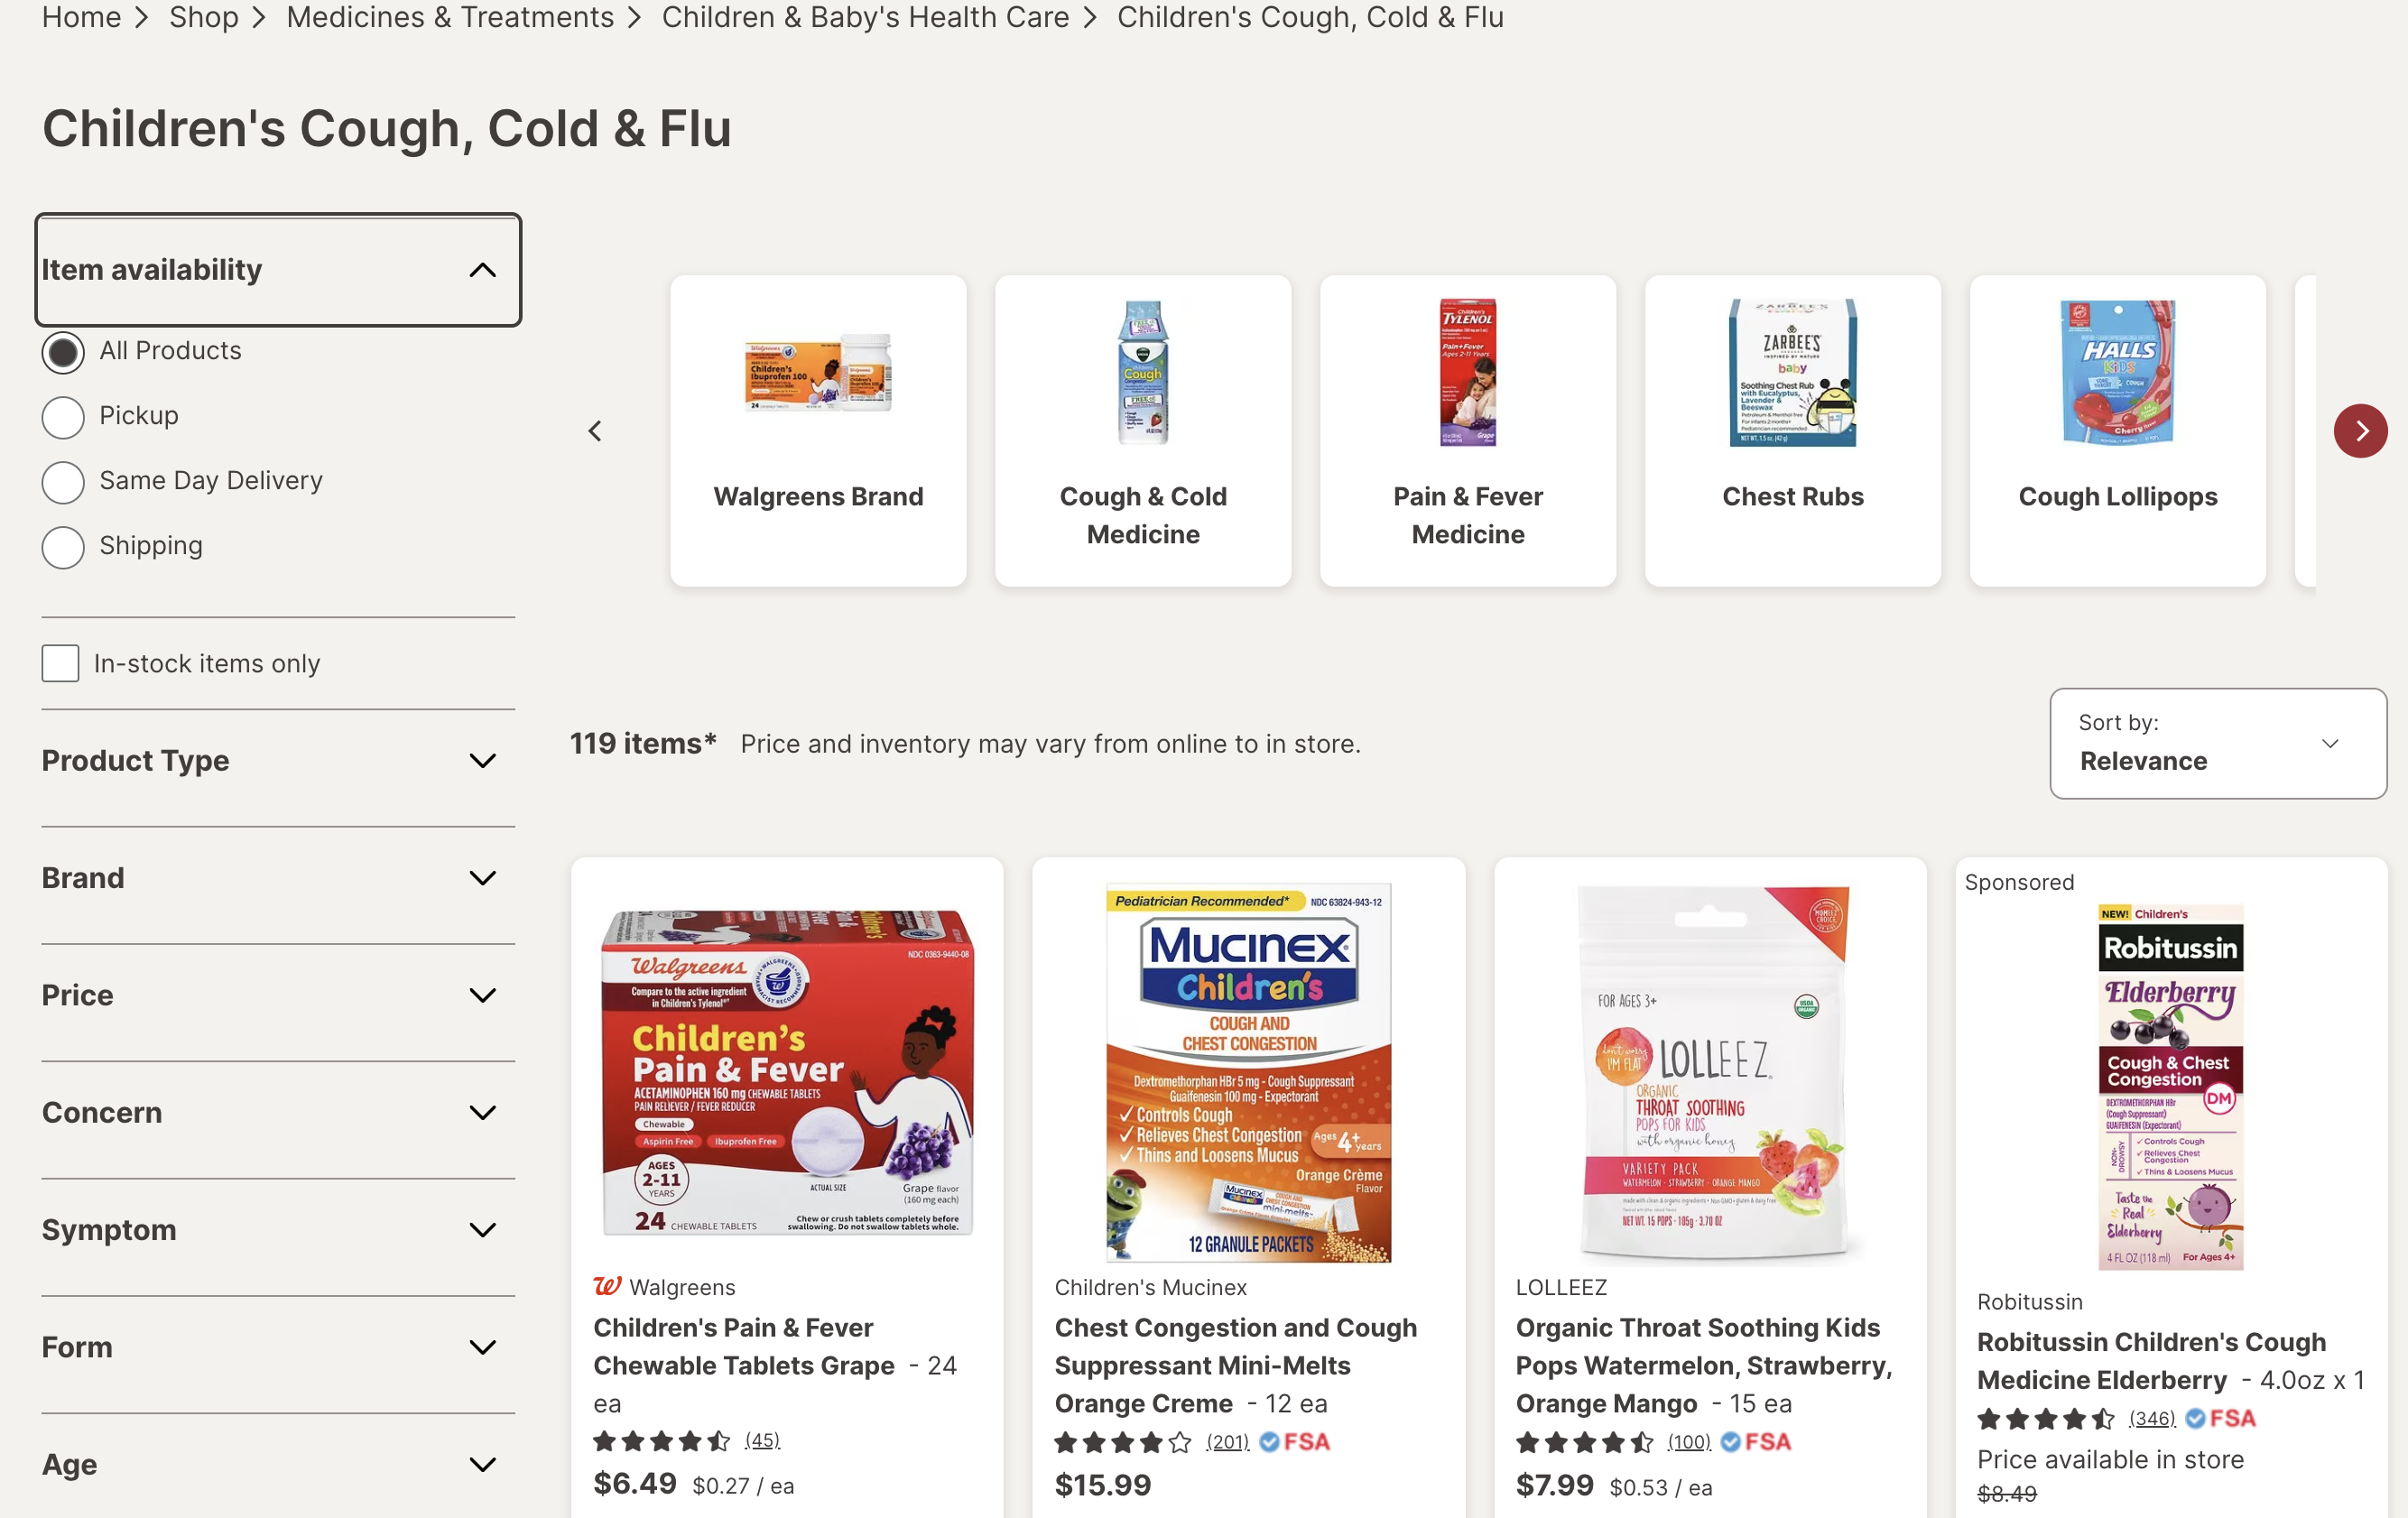 ecommerce website features product filters - 29 Must-Have Features For Ecommerce Websites